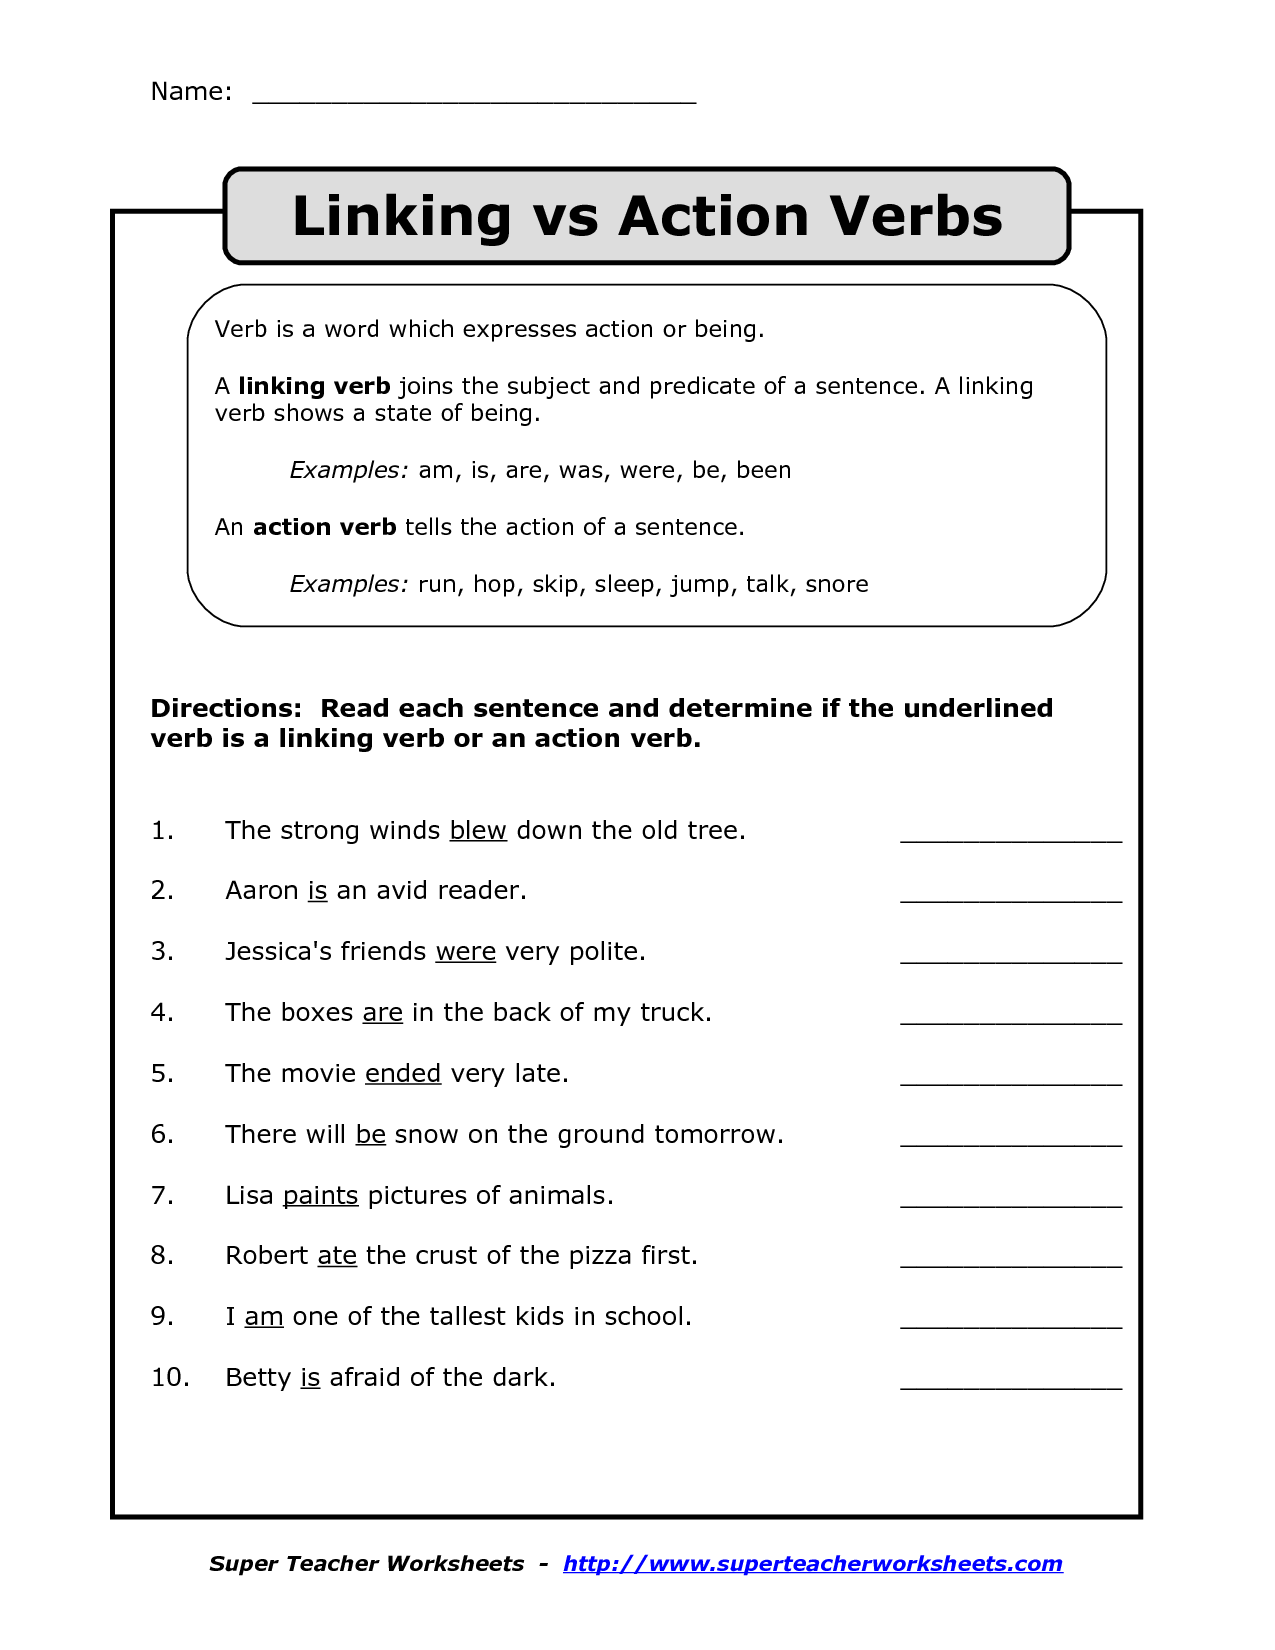 18 Best Images Of 5 Grade Worksheets On Verb Action And Linking Verbs 